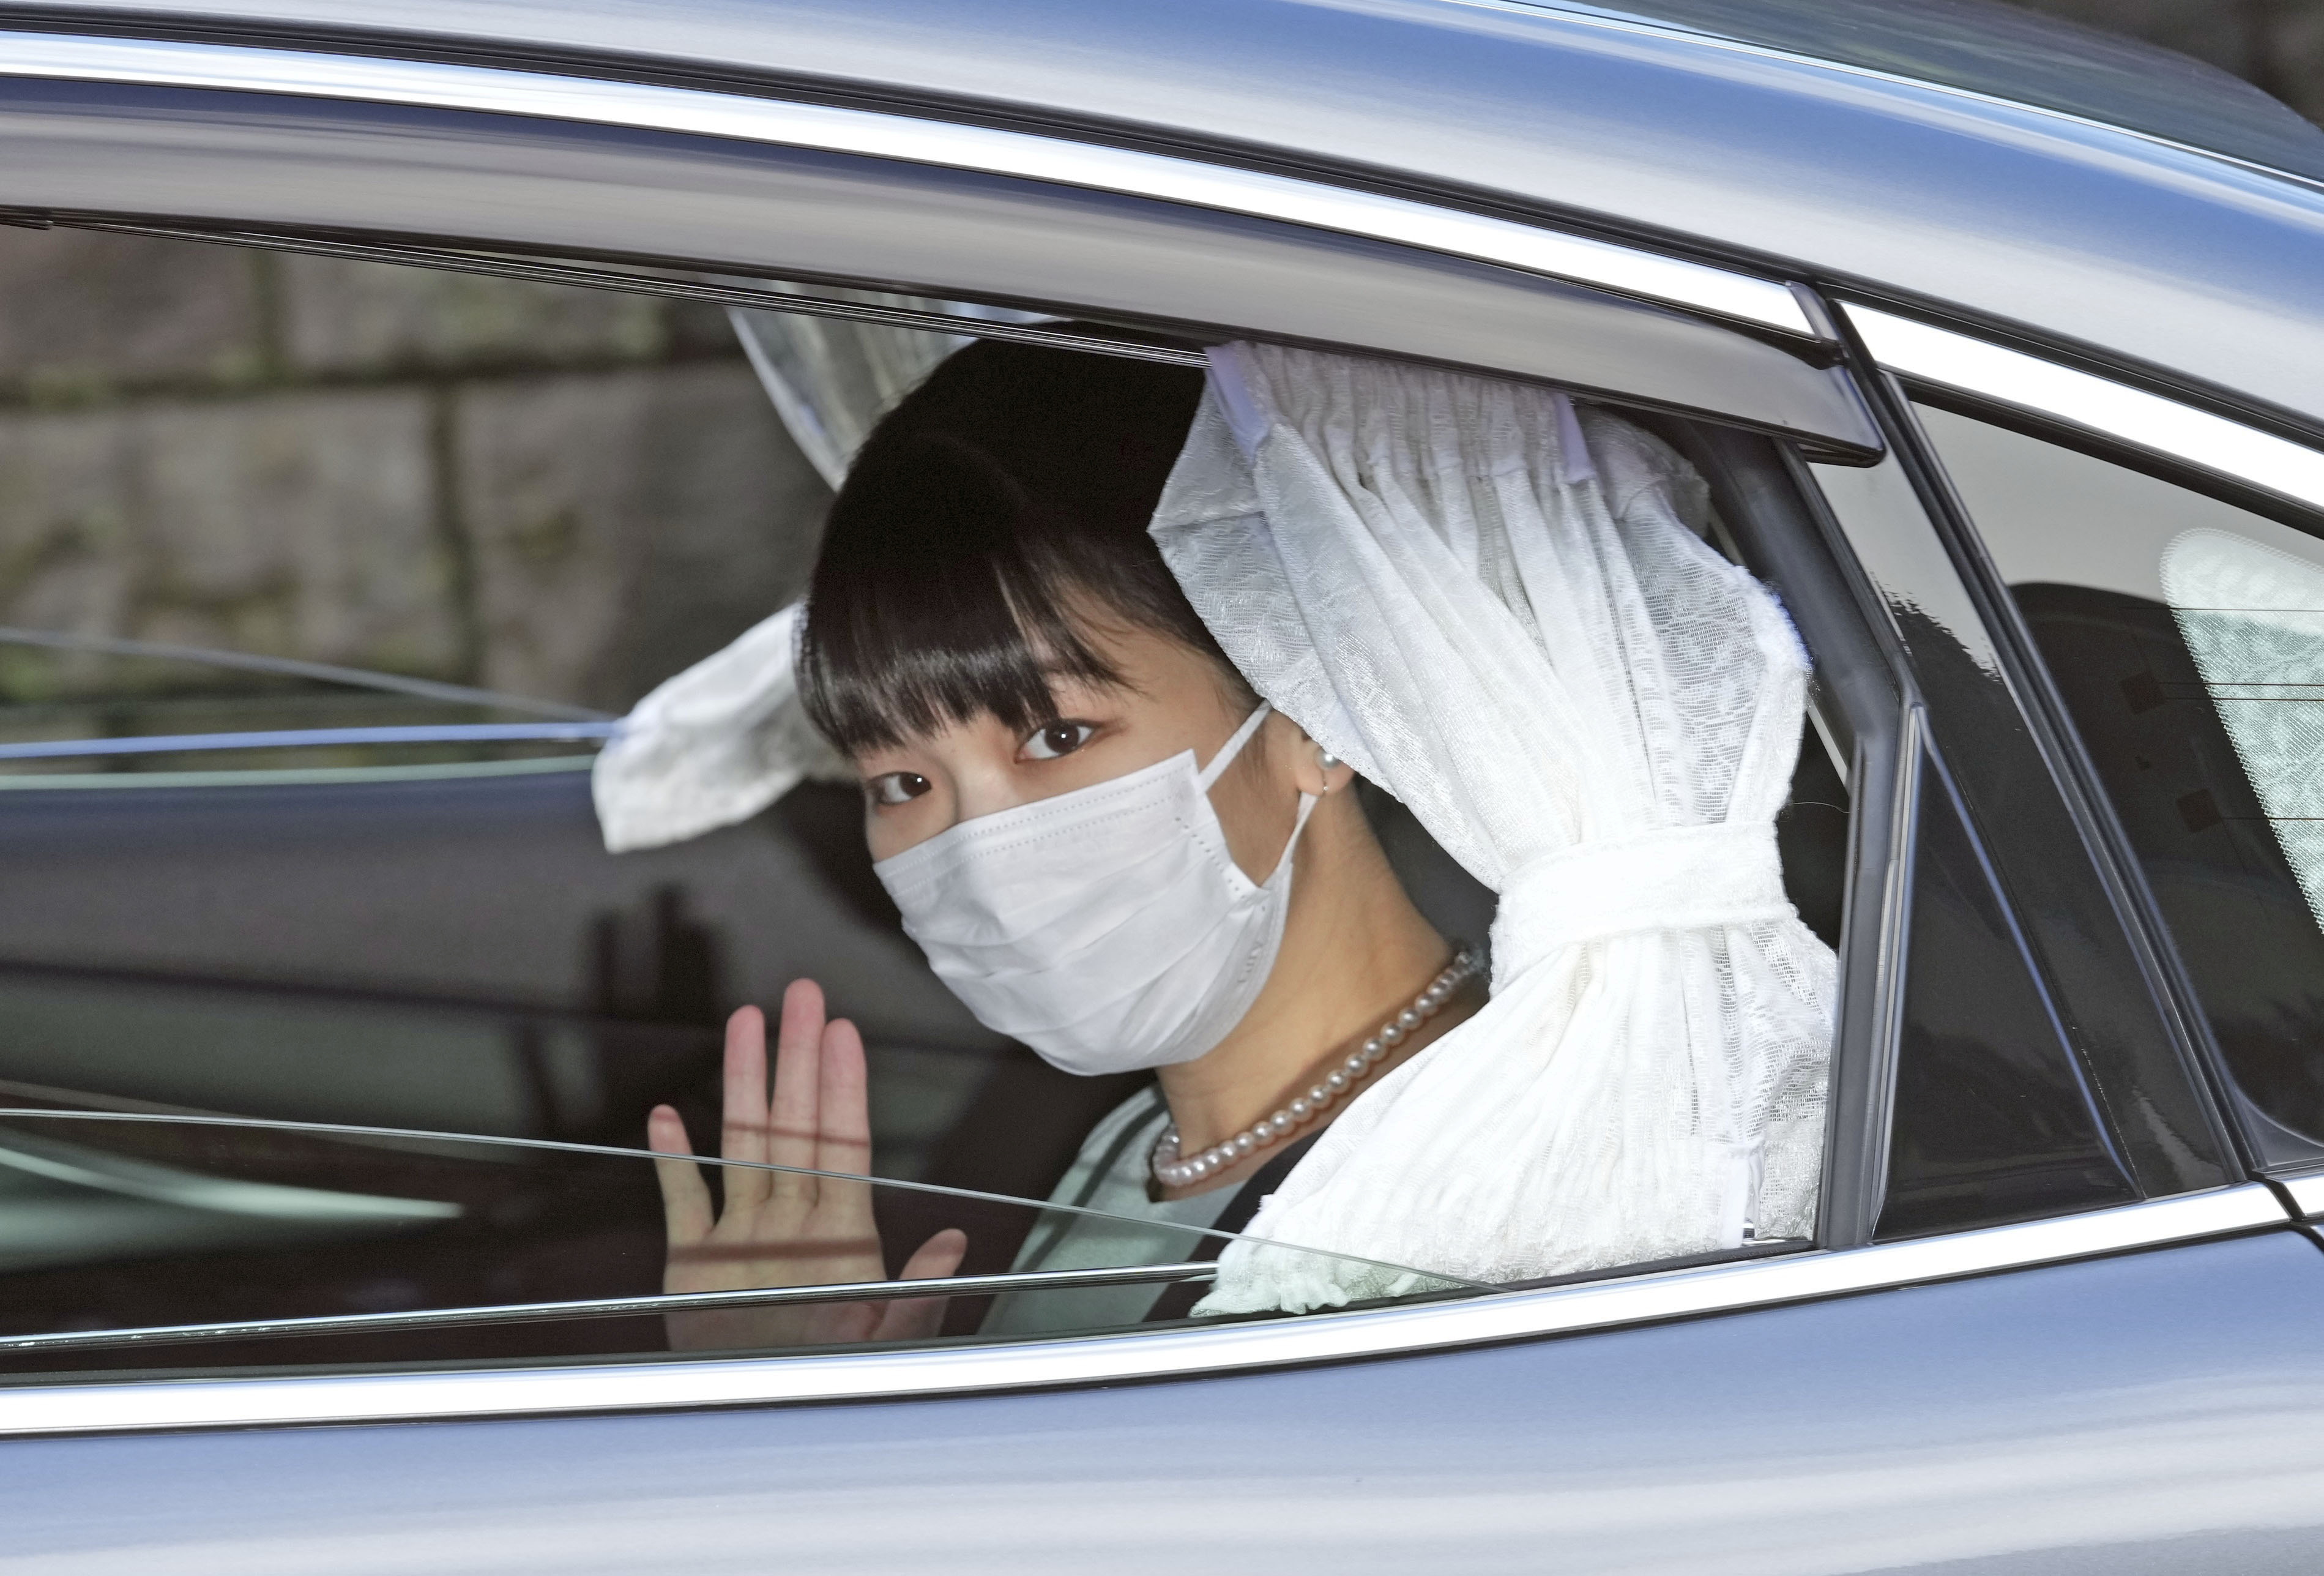 Japan's Princess Mako leaves her home for her marriage in Akasaka Estate in Tokyo